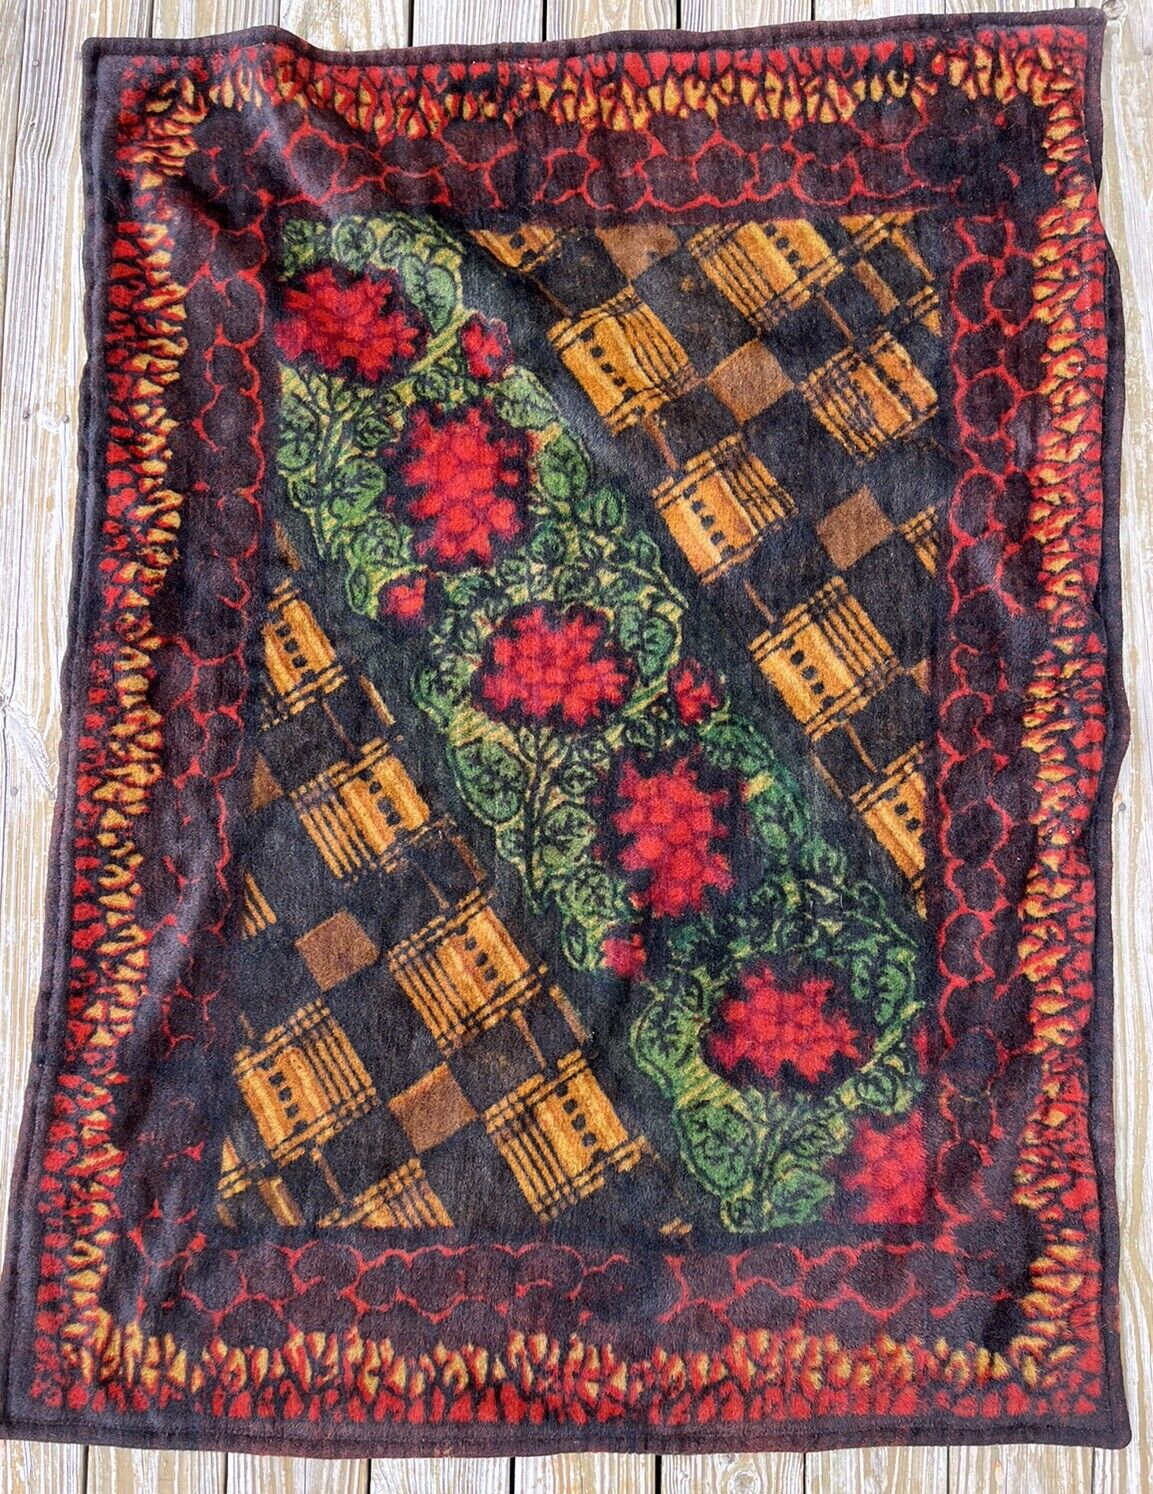 Vintage Chase Carriage Sleigh Buggy Lap Blanket Horse 58x43